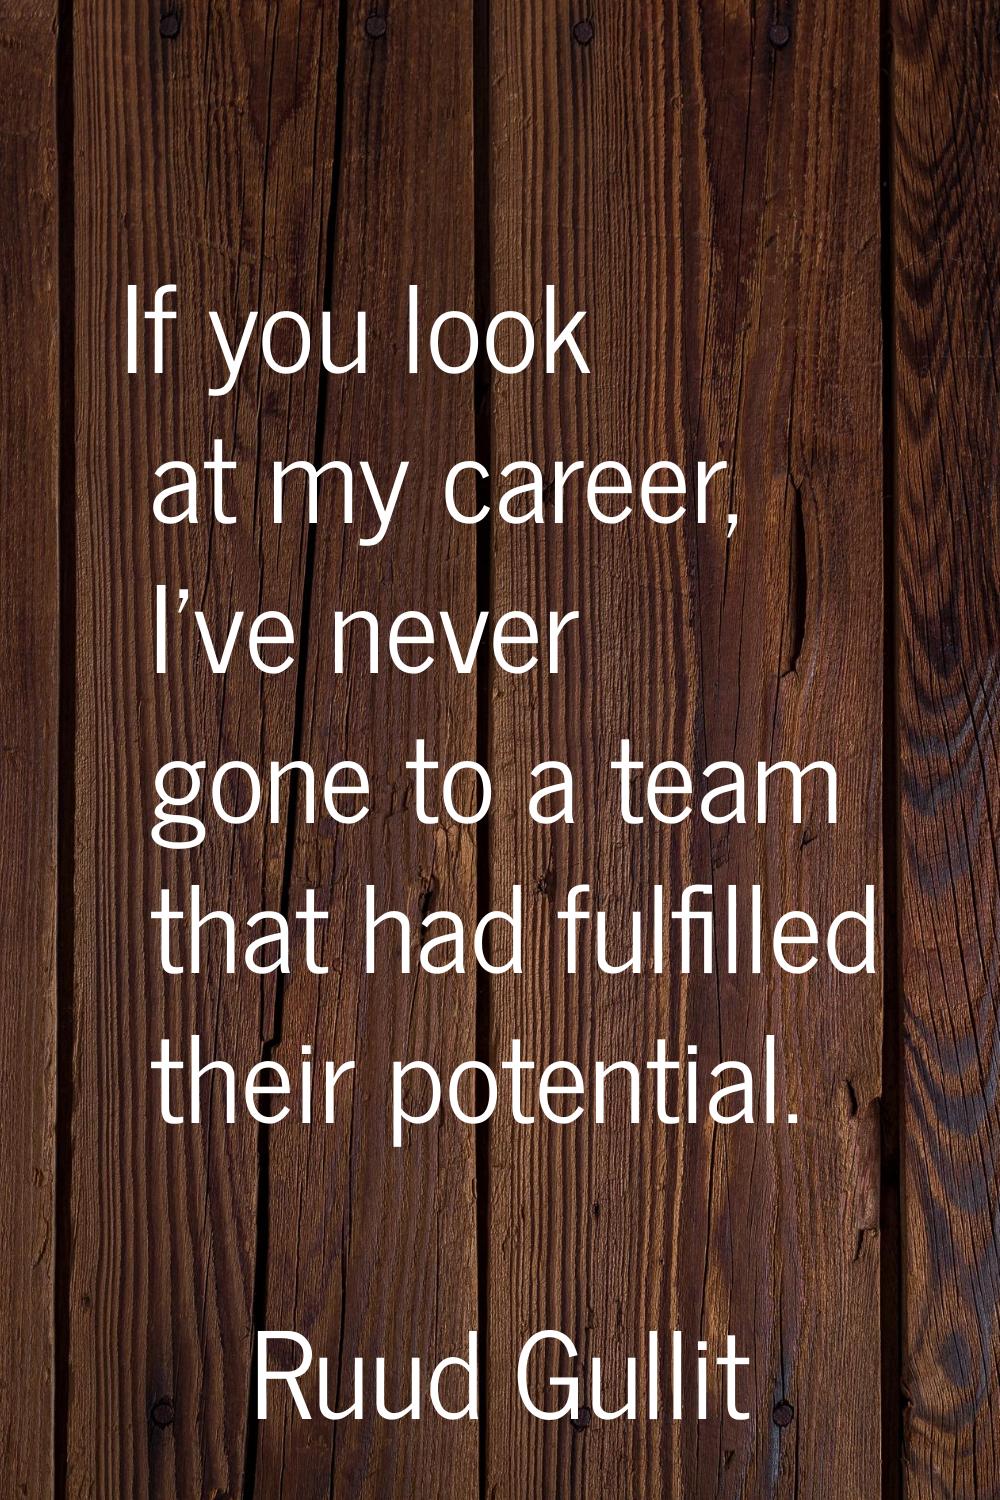 If you look at my career, I've never gone to a team that had fulfilled their potential.